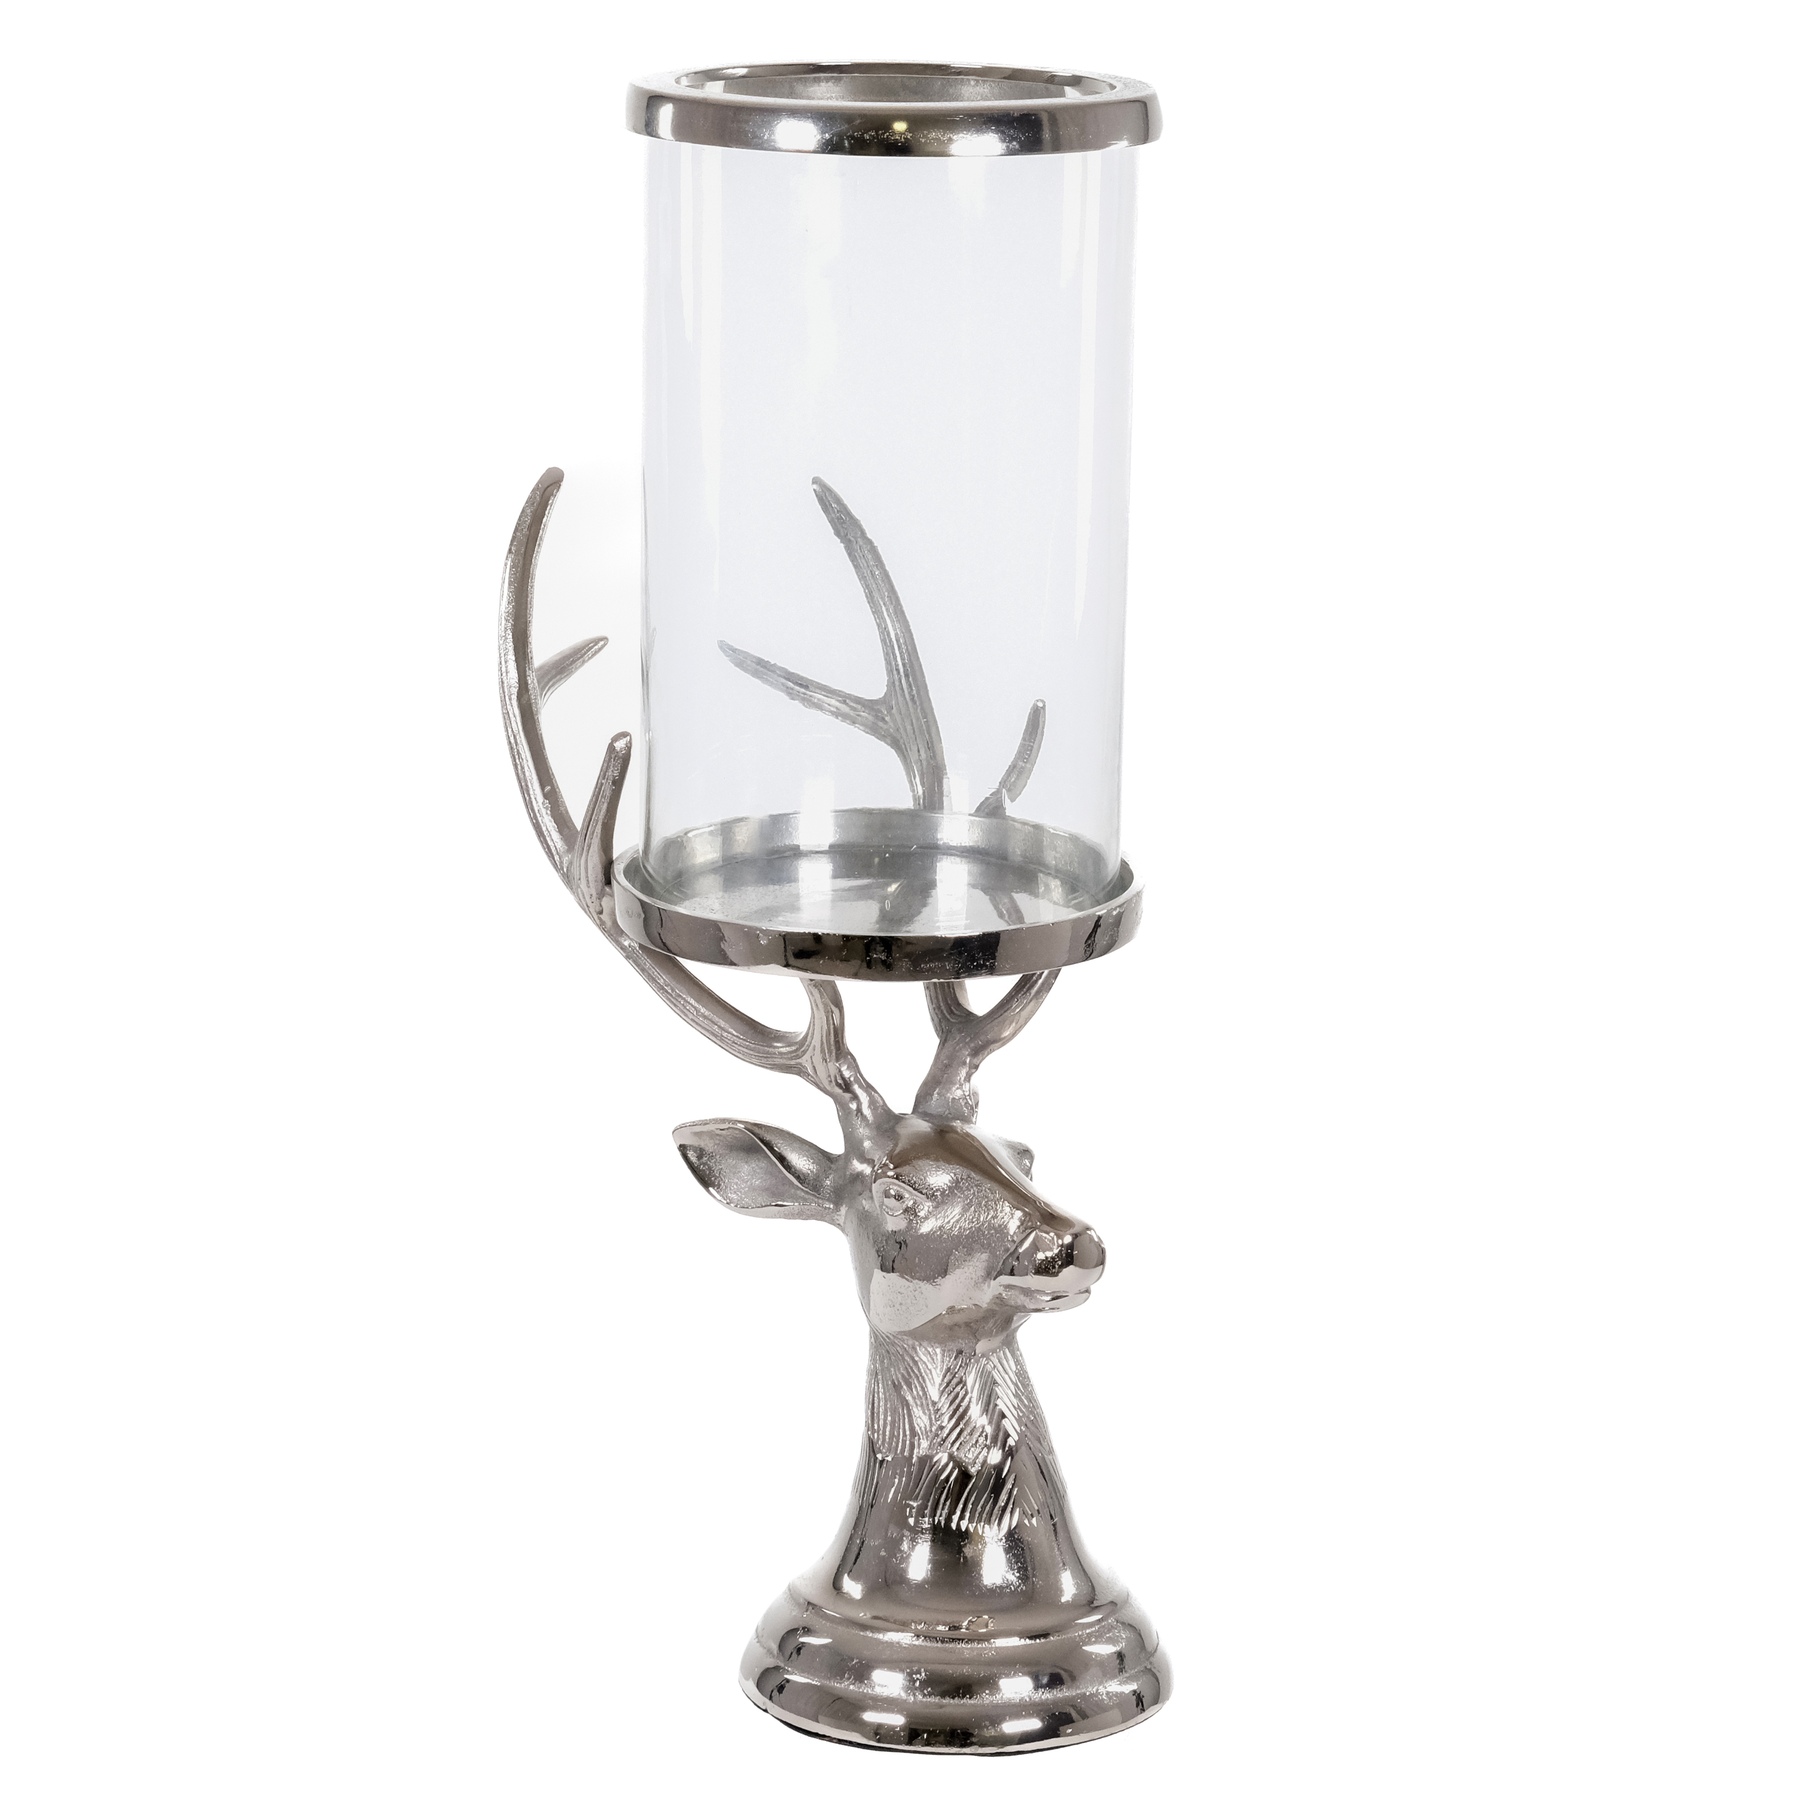 Tall Silver Stag Candle Hurricane Lantern - Image 1